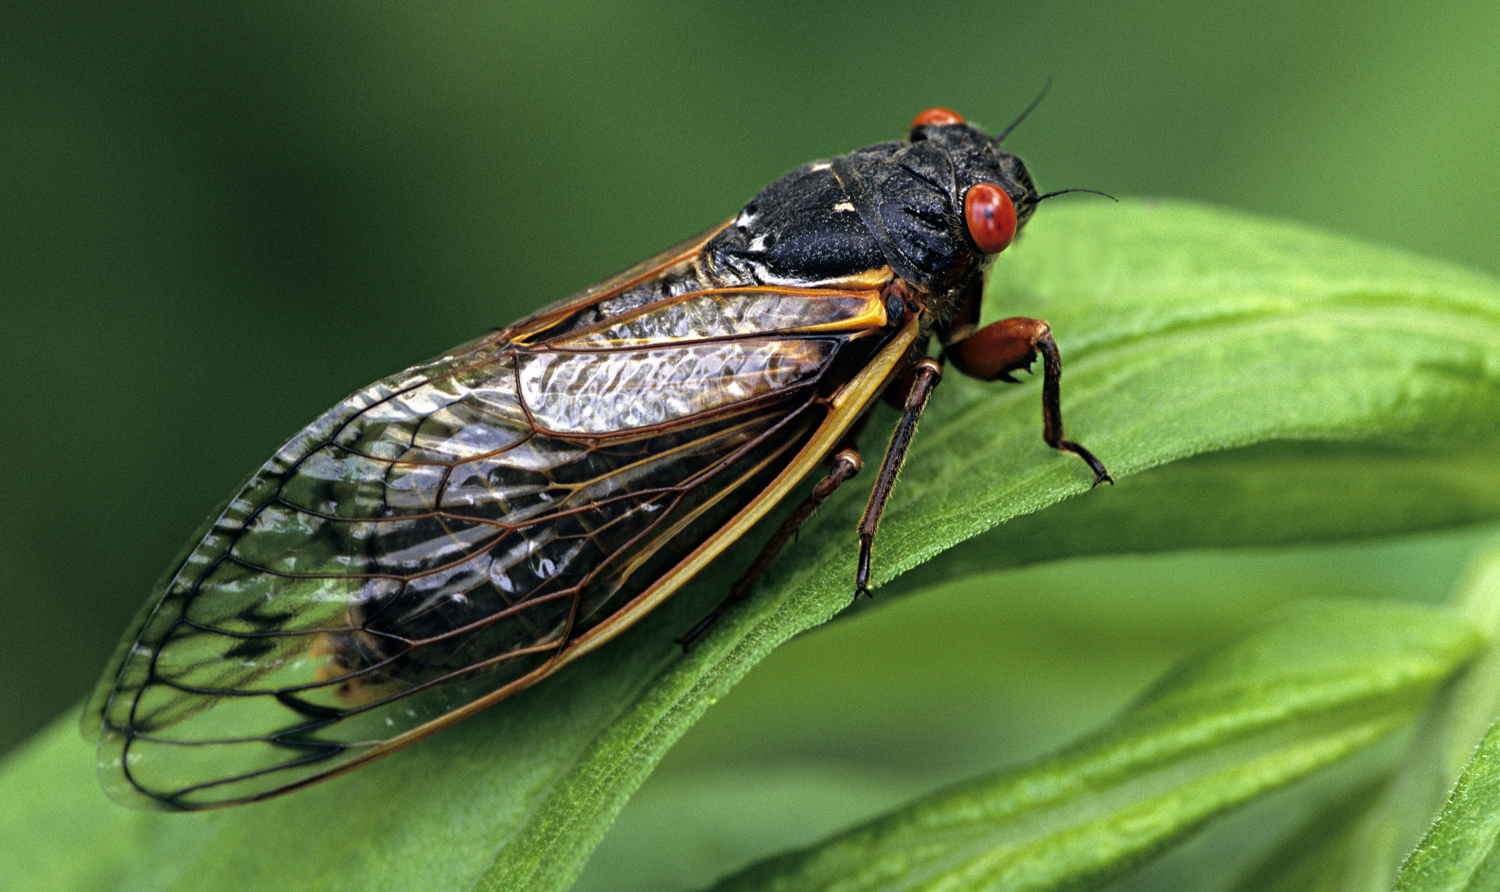 An adult cicada with a black body, large wings, and red eyes sits on a leaf.